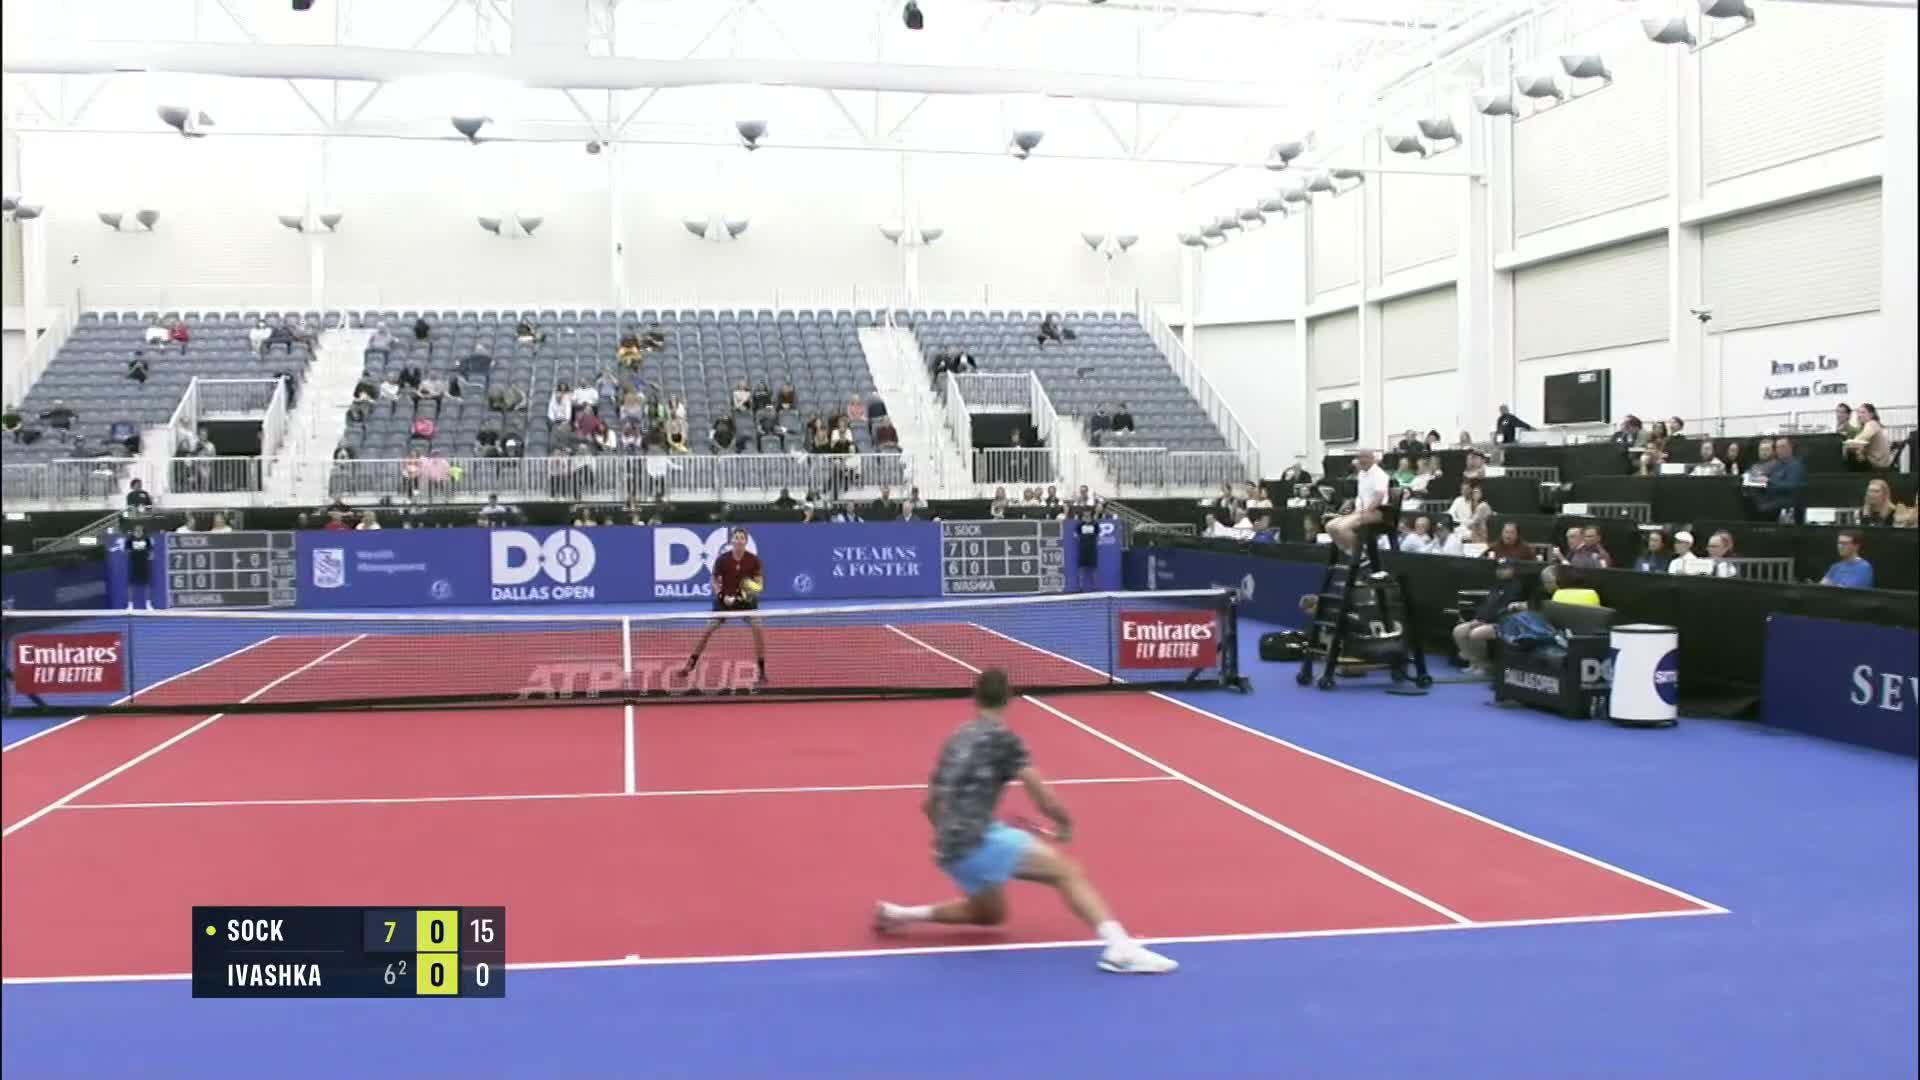 Hes Got Him Again! Sock Squeaks and Scores In Dallas Video Search Results ATP Tour Tennis